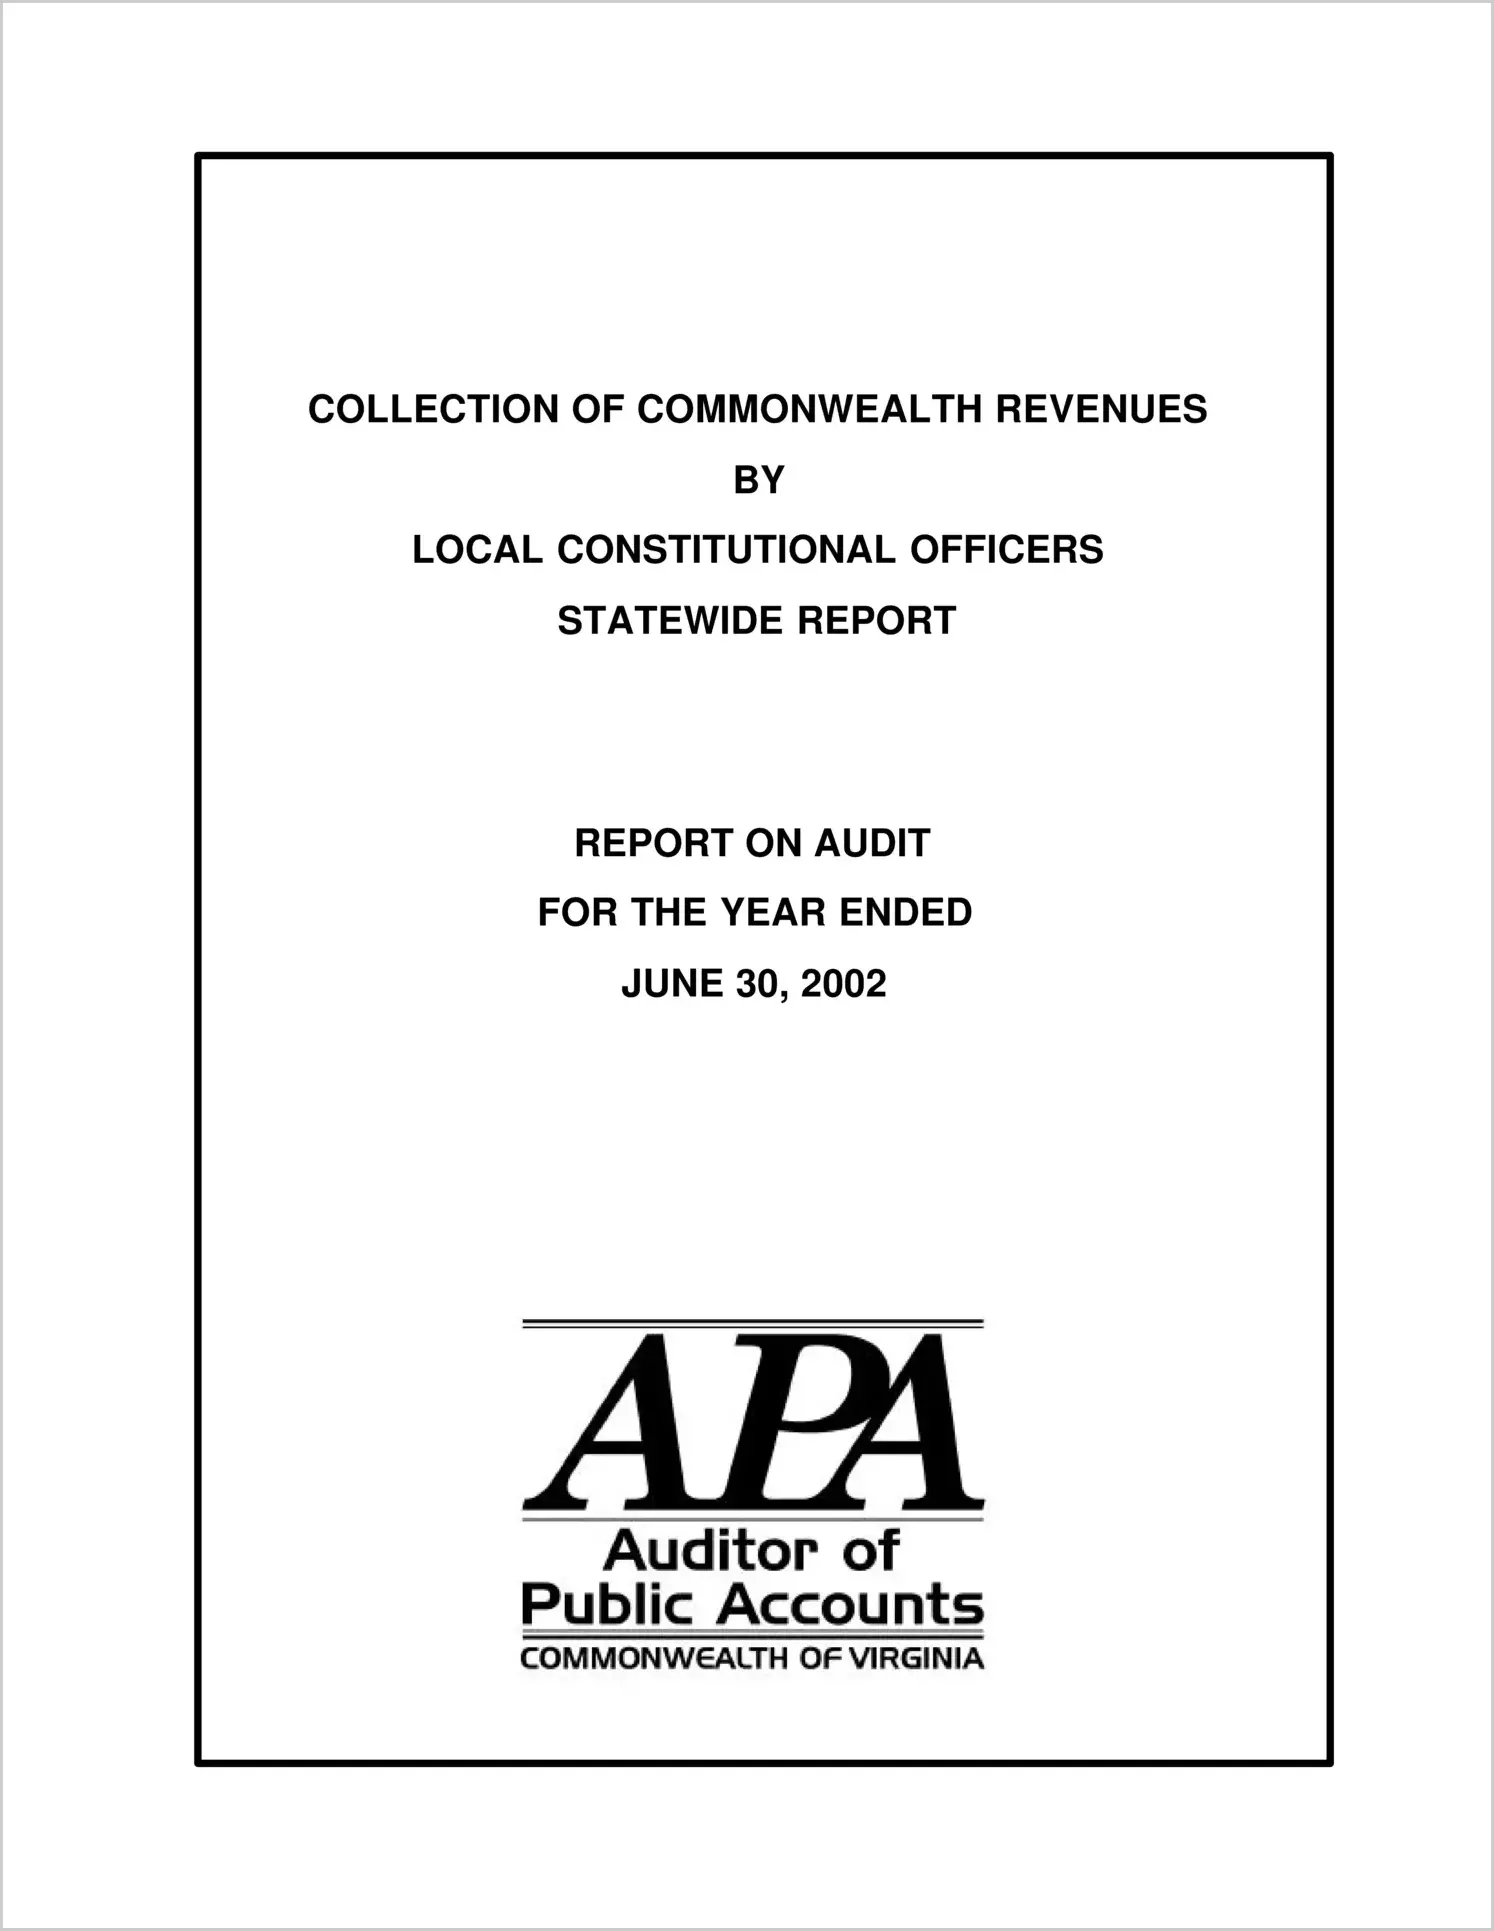 Collection of Commonwealth Revenues by Local Constitutional Officers Statewide Report for the year ended June 30, 2002